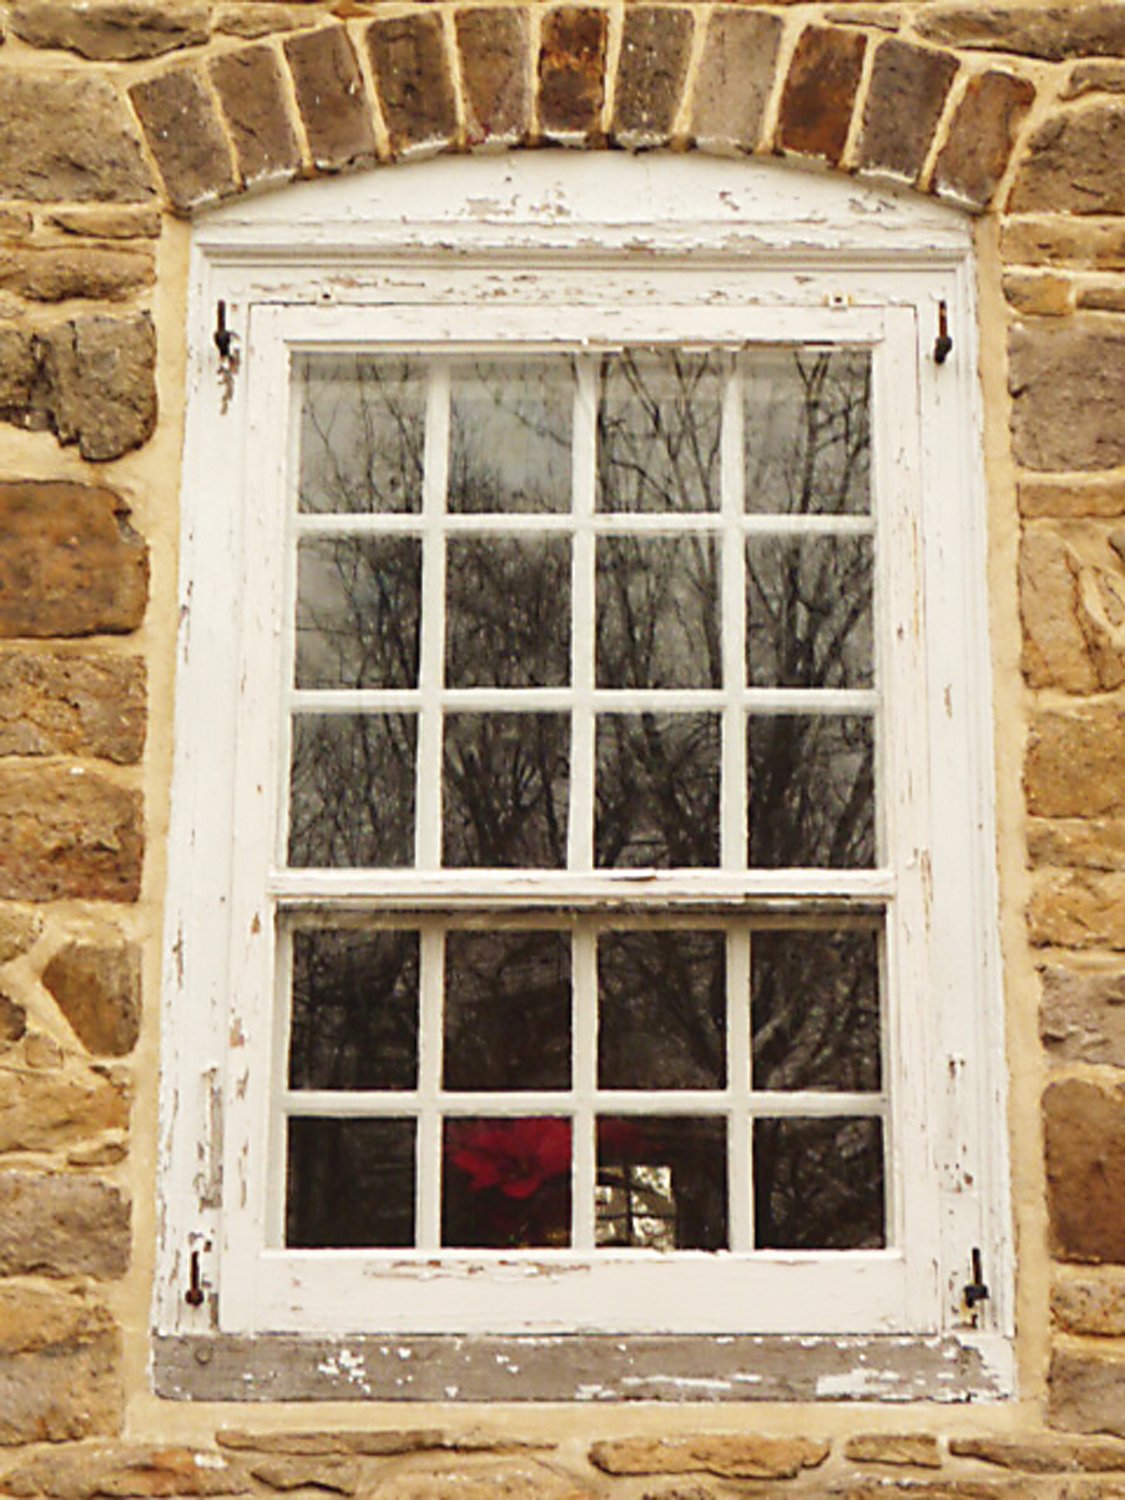 Exterior woodwork is in need of scraping, wood repair and painting includes 30 windows.